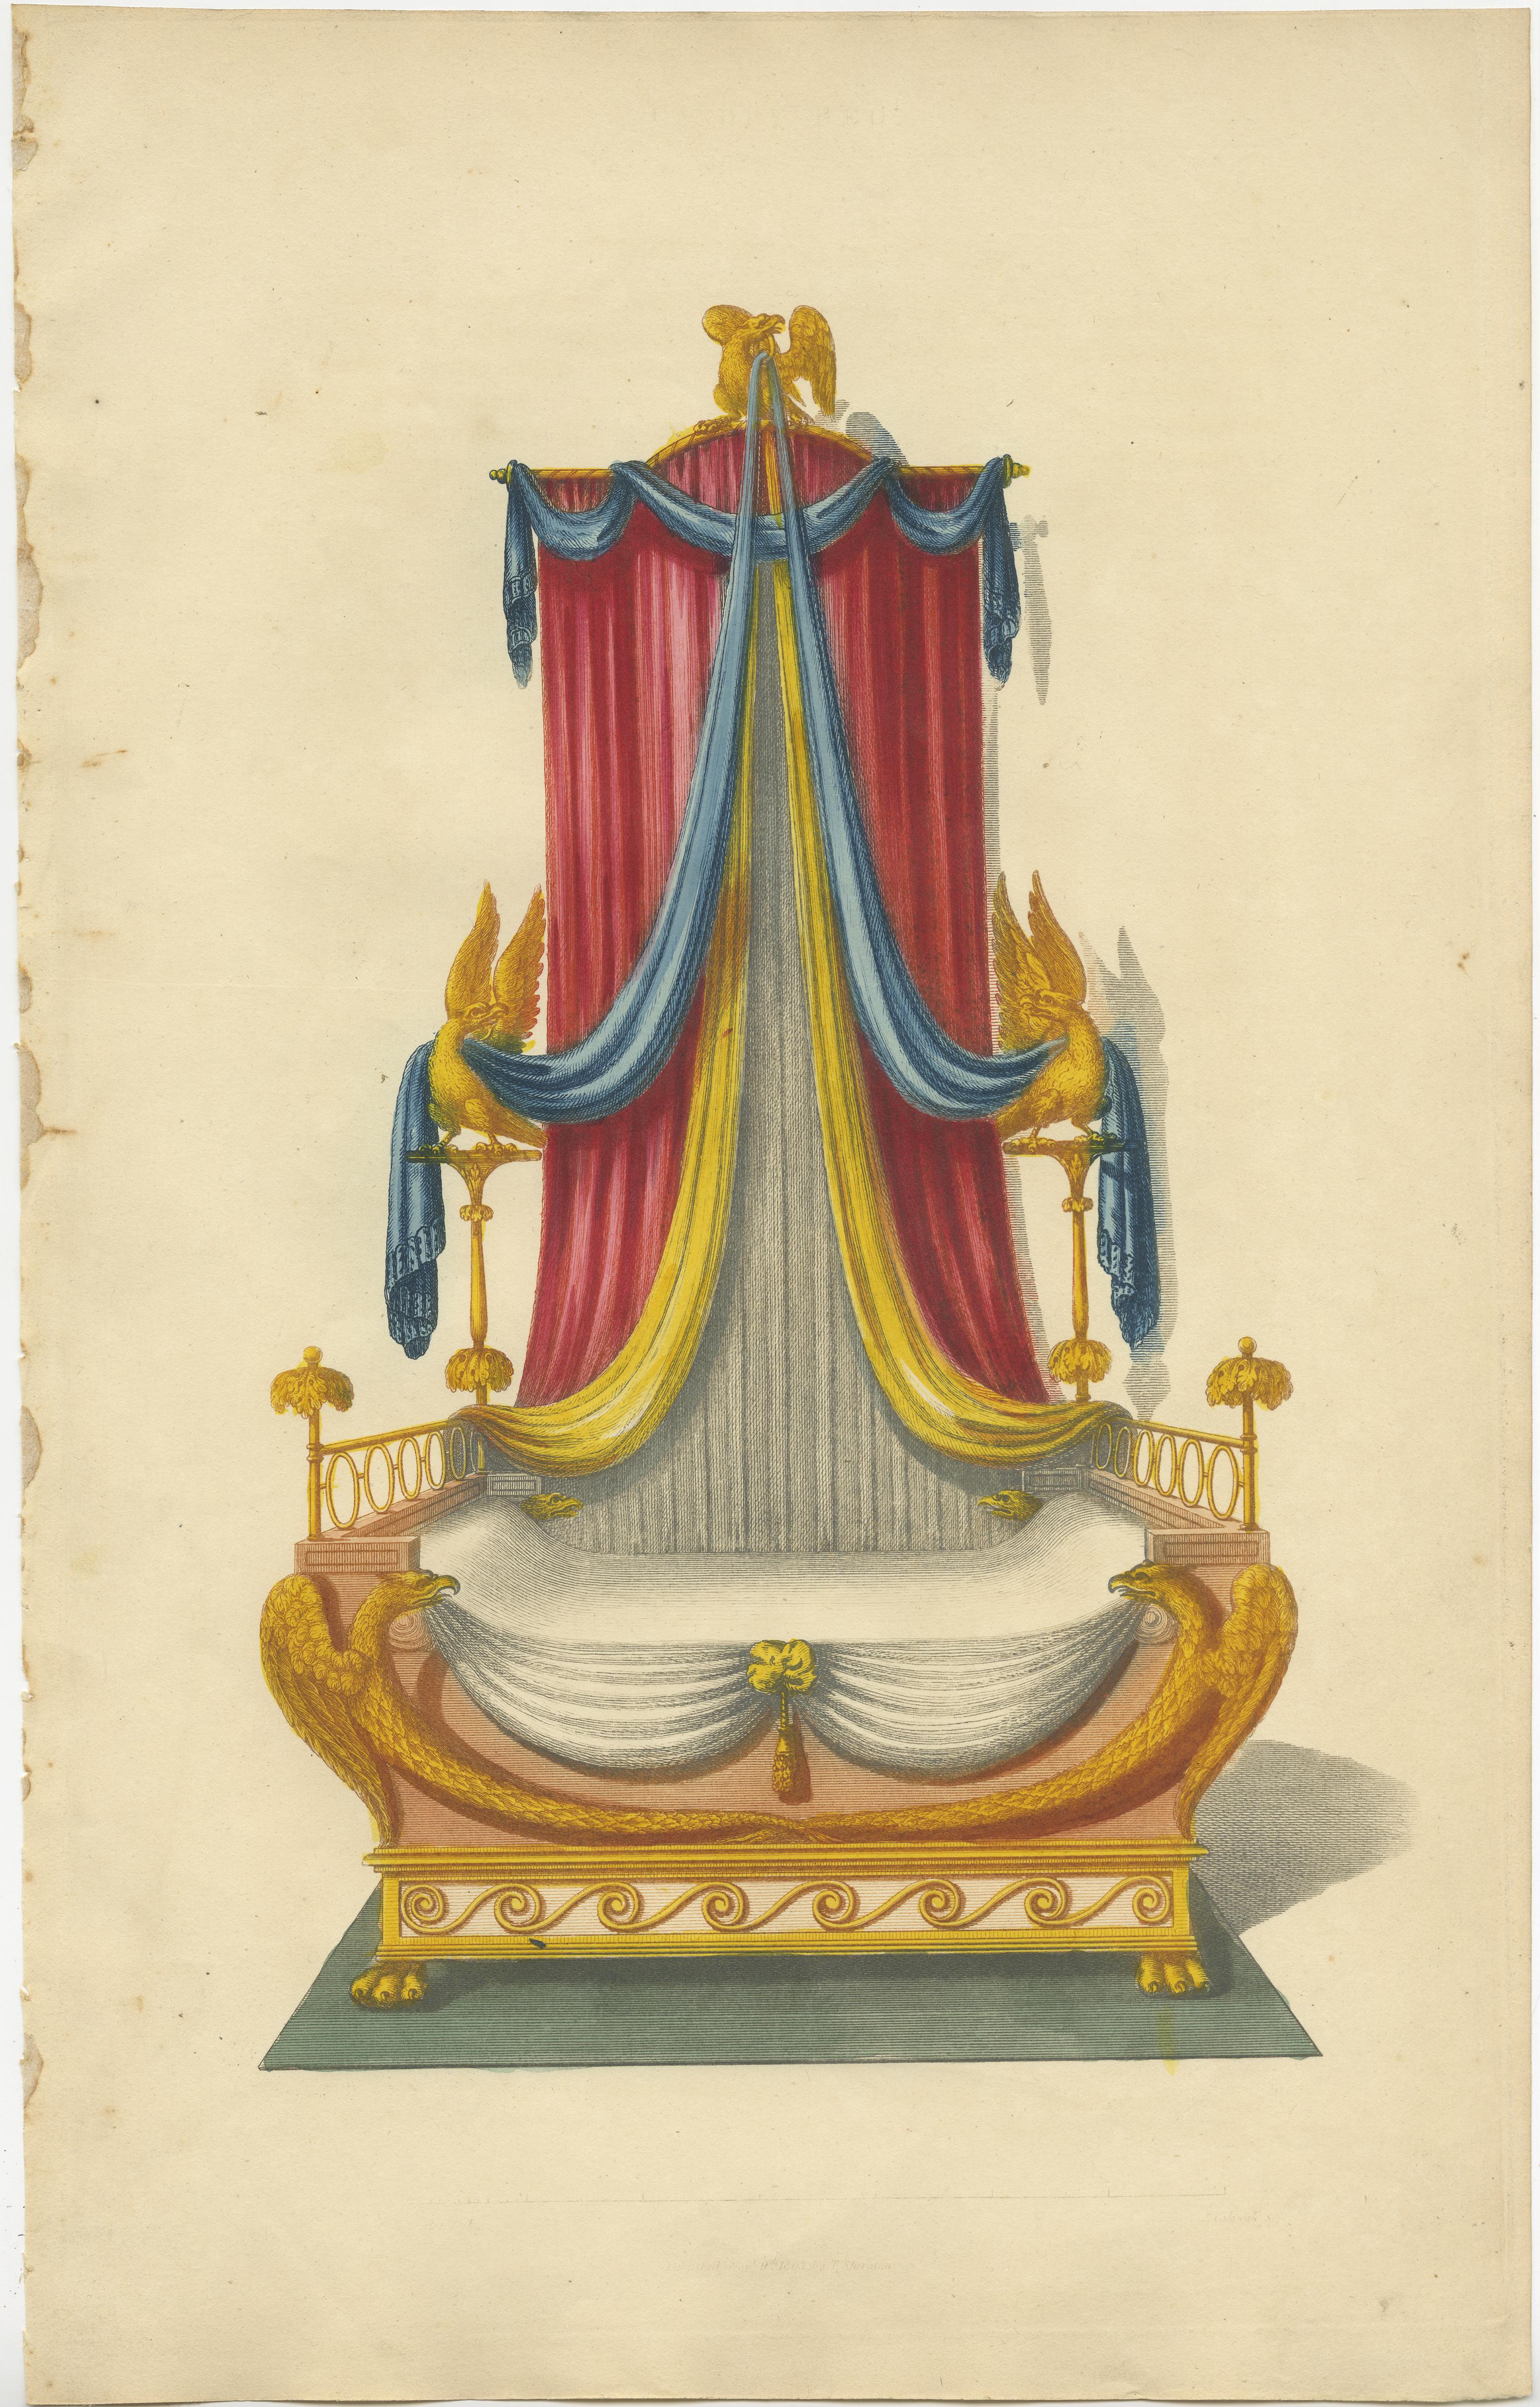 Set of seven antique prints of beds with drapery. These prints originate from 'The General Artist's Encyclopaedia' by Thomas Sheraton. Published 1803-1805.